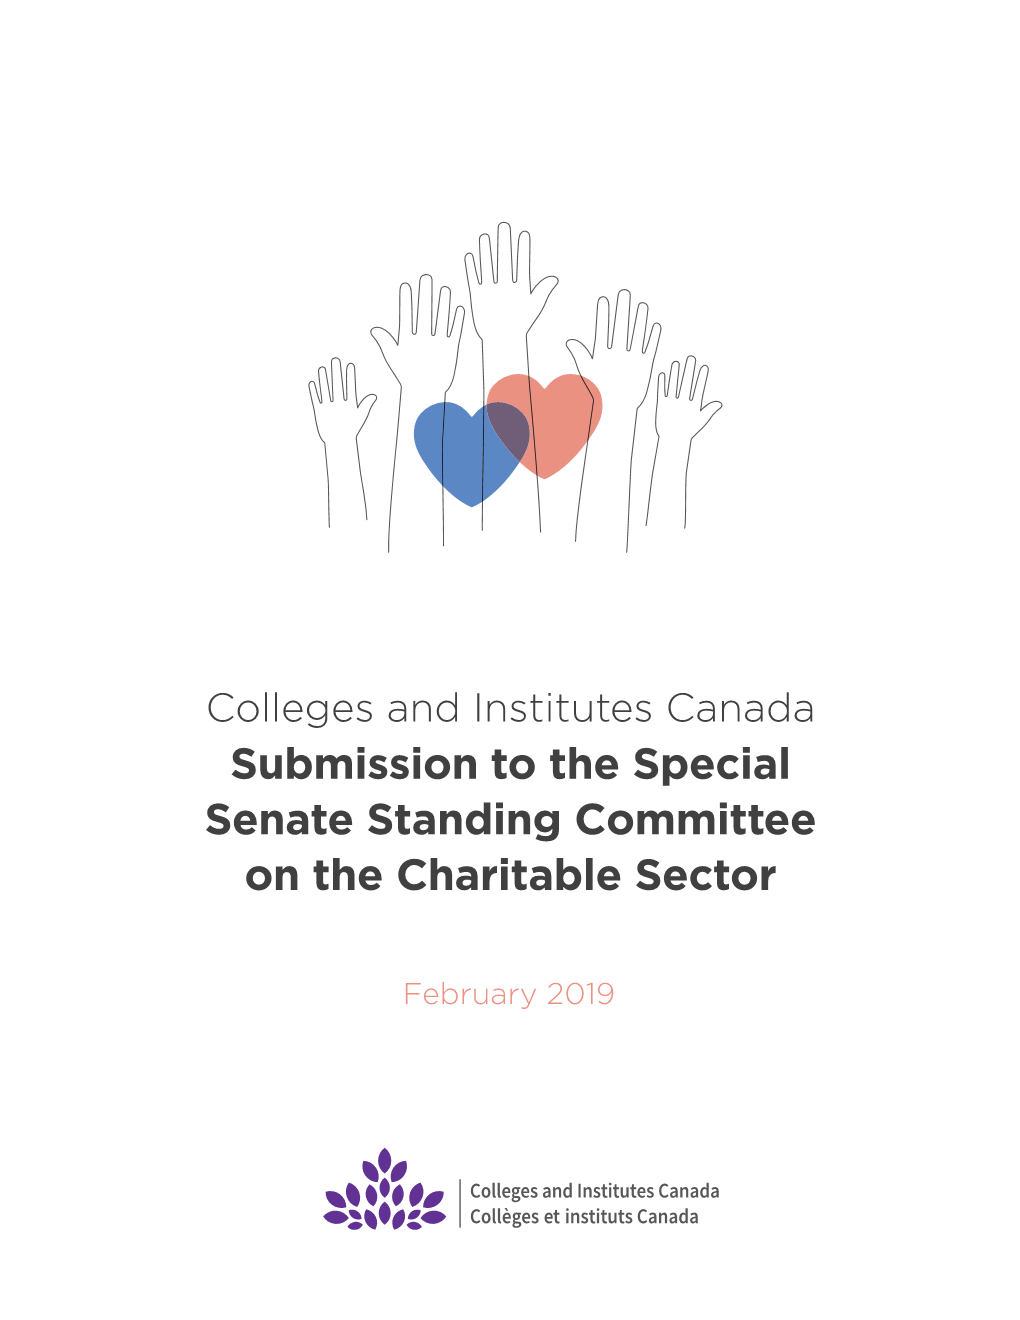 Submission to the Special Senate Standing Committee on the Charitable Sector